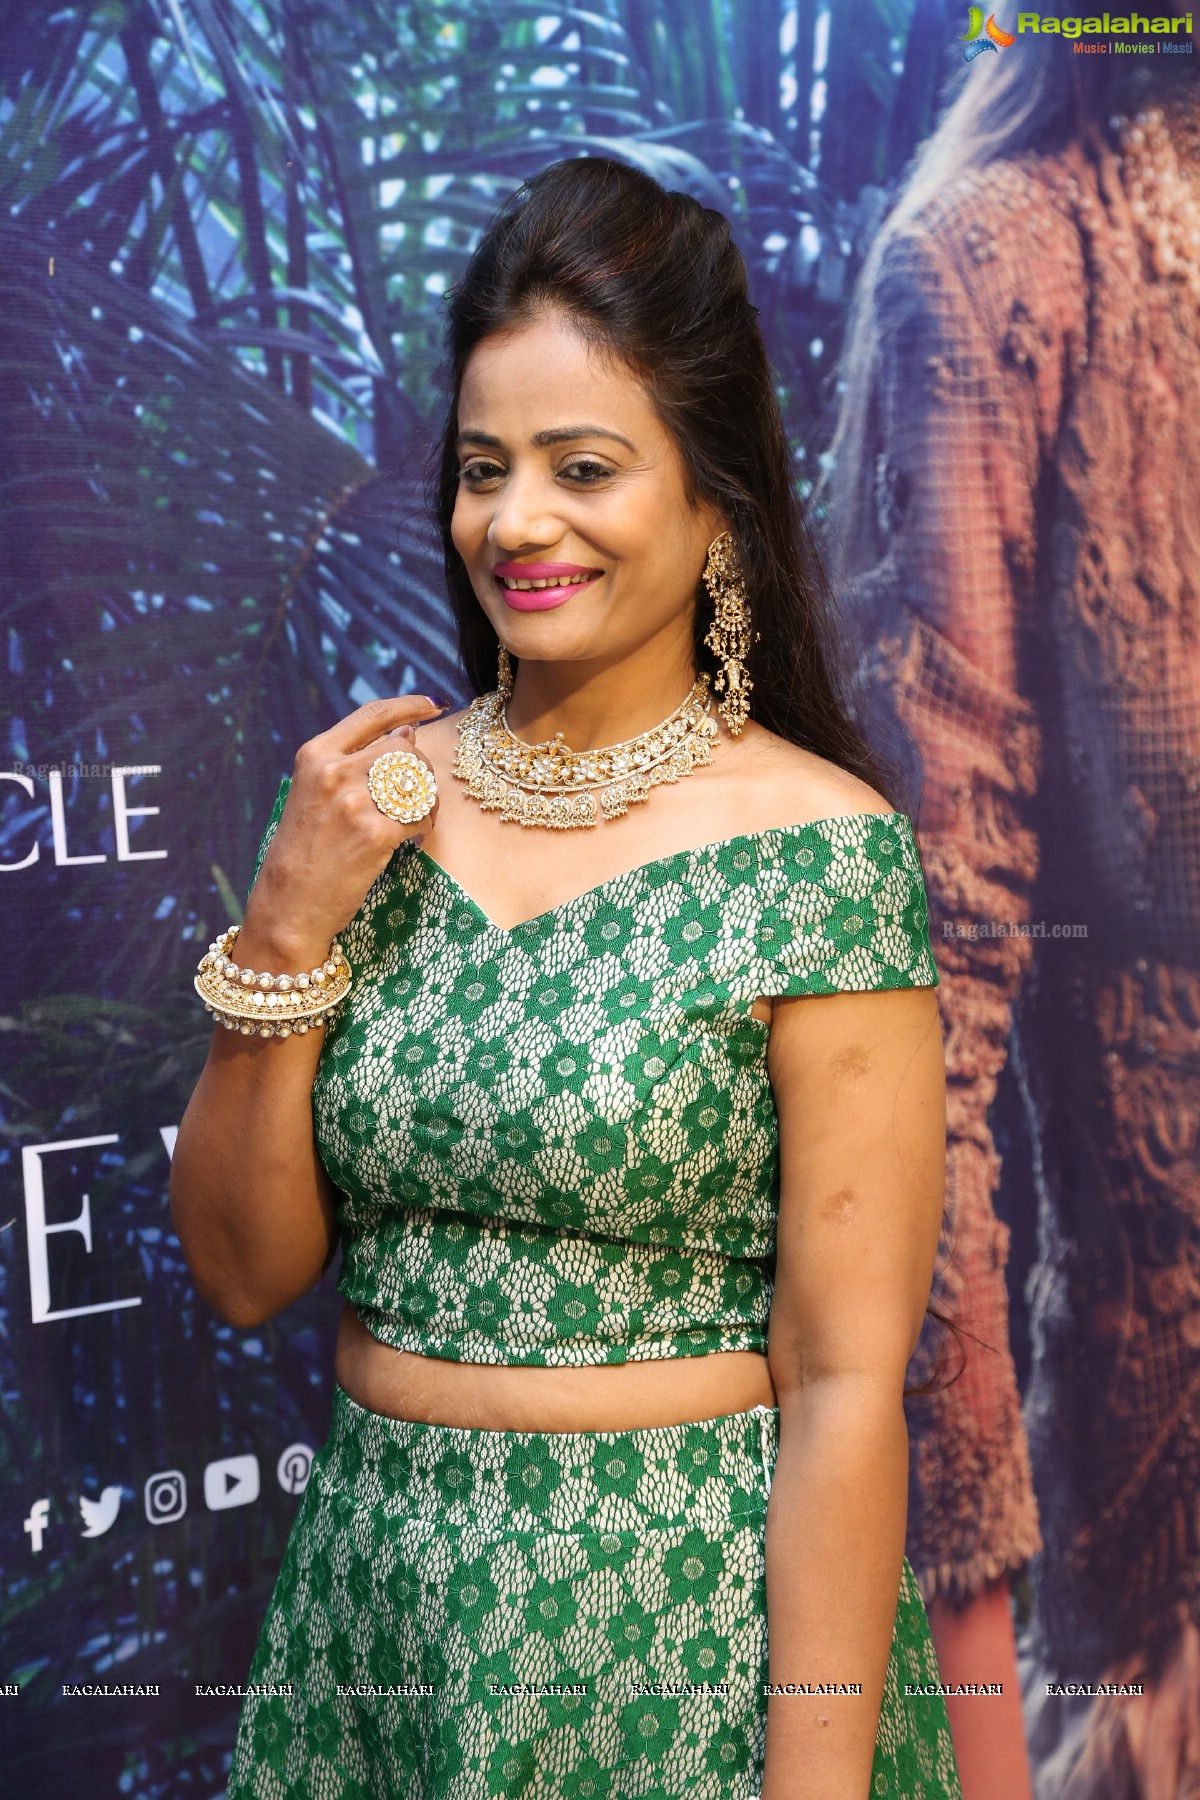 Grand Launch of Chronicle Collection by Jaipur Jewels at Taj Krishna